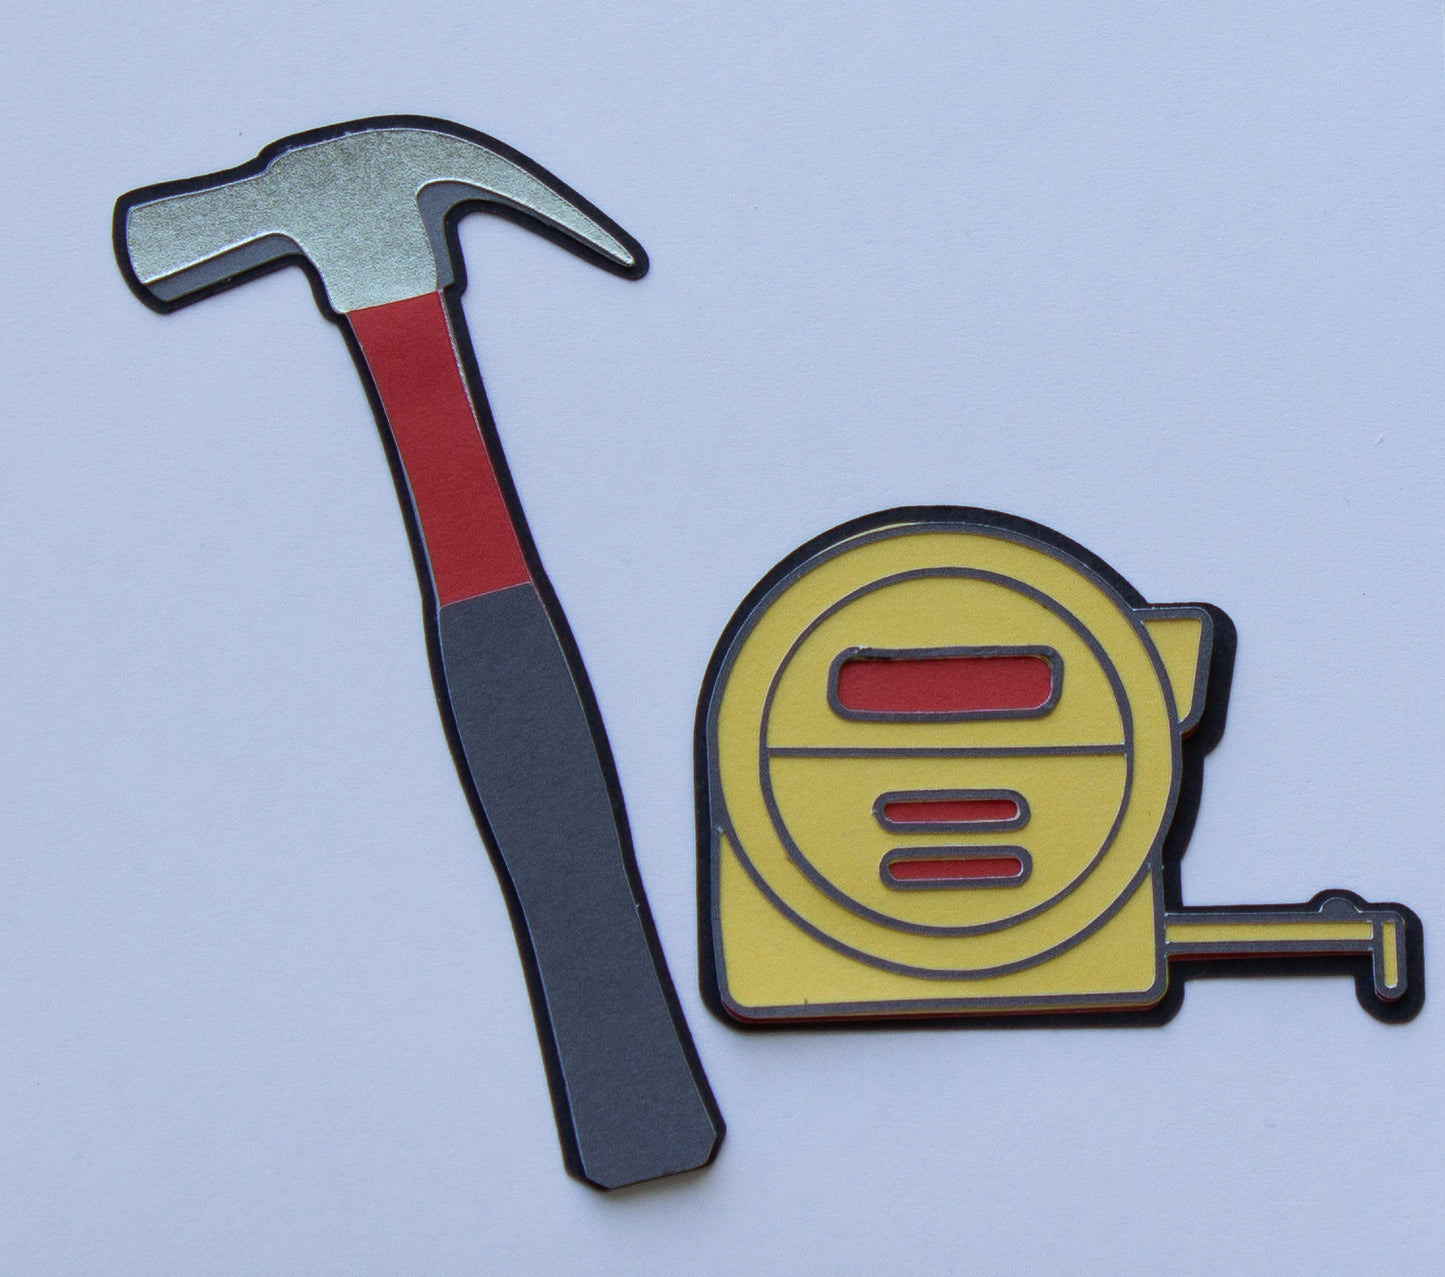 Element: Tools - Hammer and Tape Measure